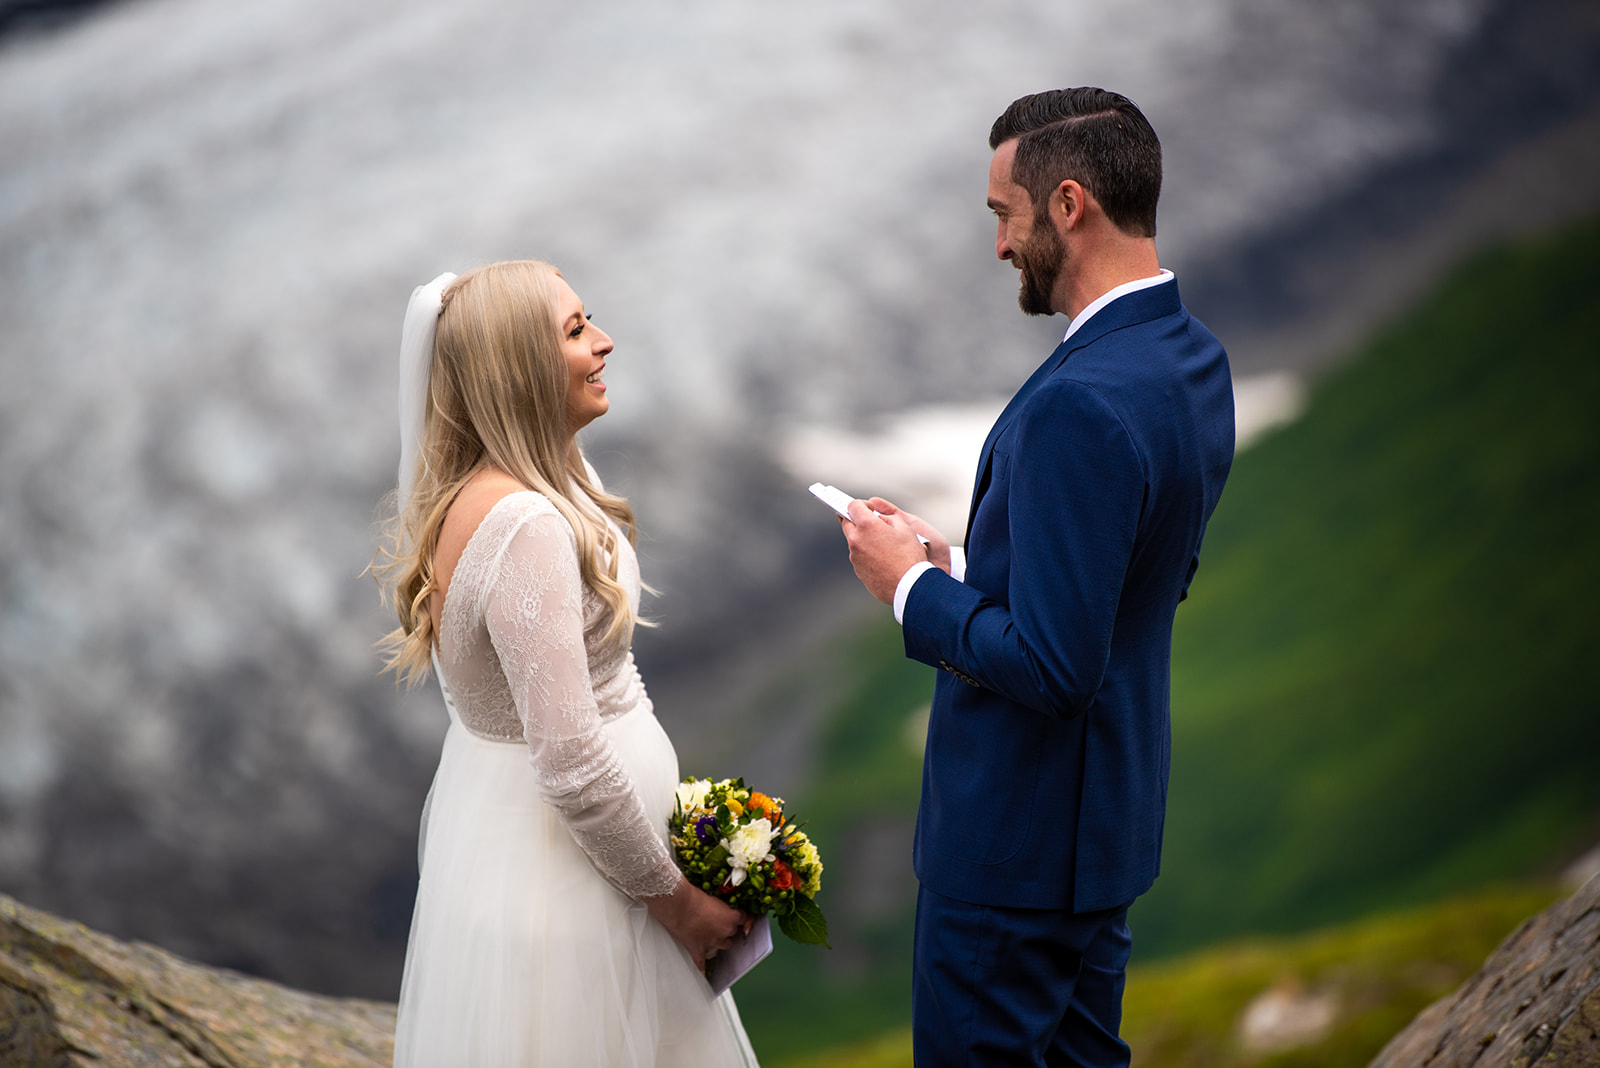 This is why I push so much for diversity and inclusion for the wedding industry in marketing and sales. Representation matters more than so many can ever believe. I took my daughter to see this yesterday and just seeing her look at the screen and see someone who looks like her with such awe and amazingness warmed my heart to new heights! | Mountain Side Bride